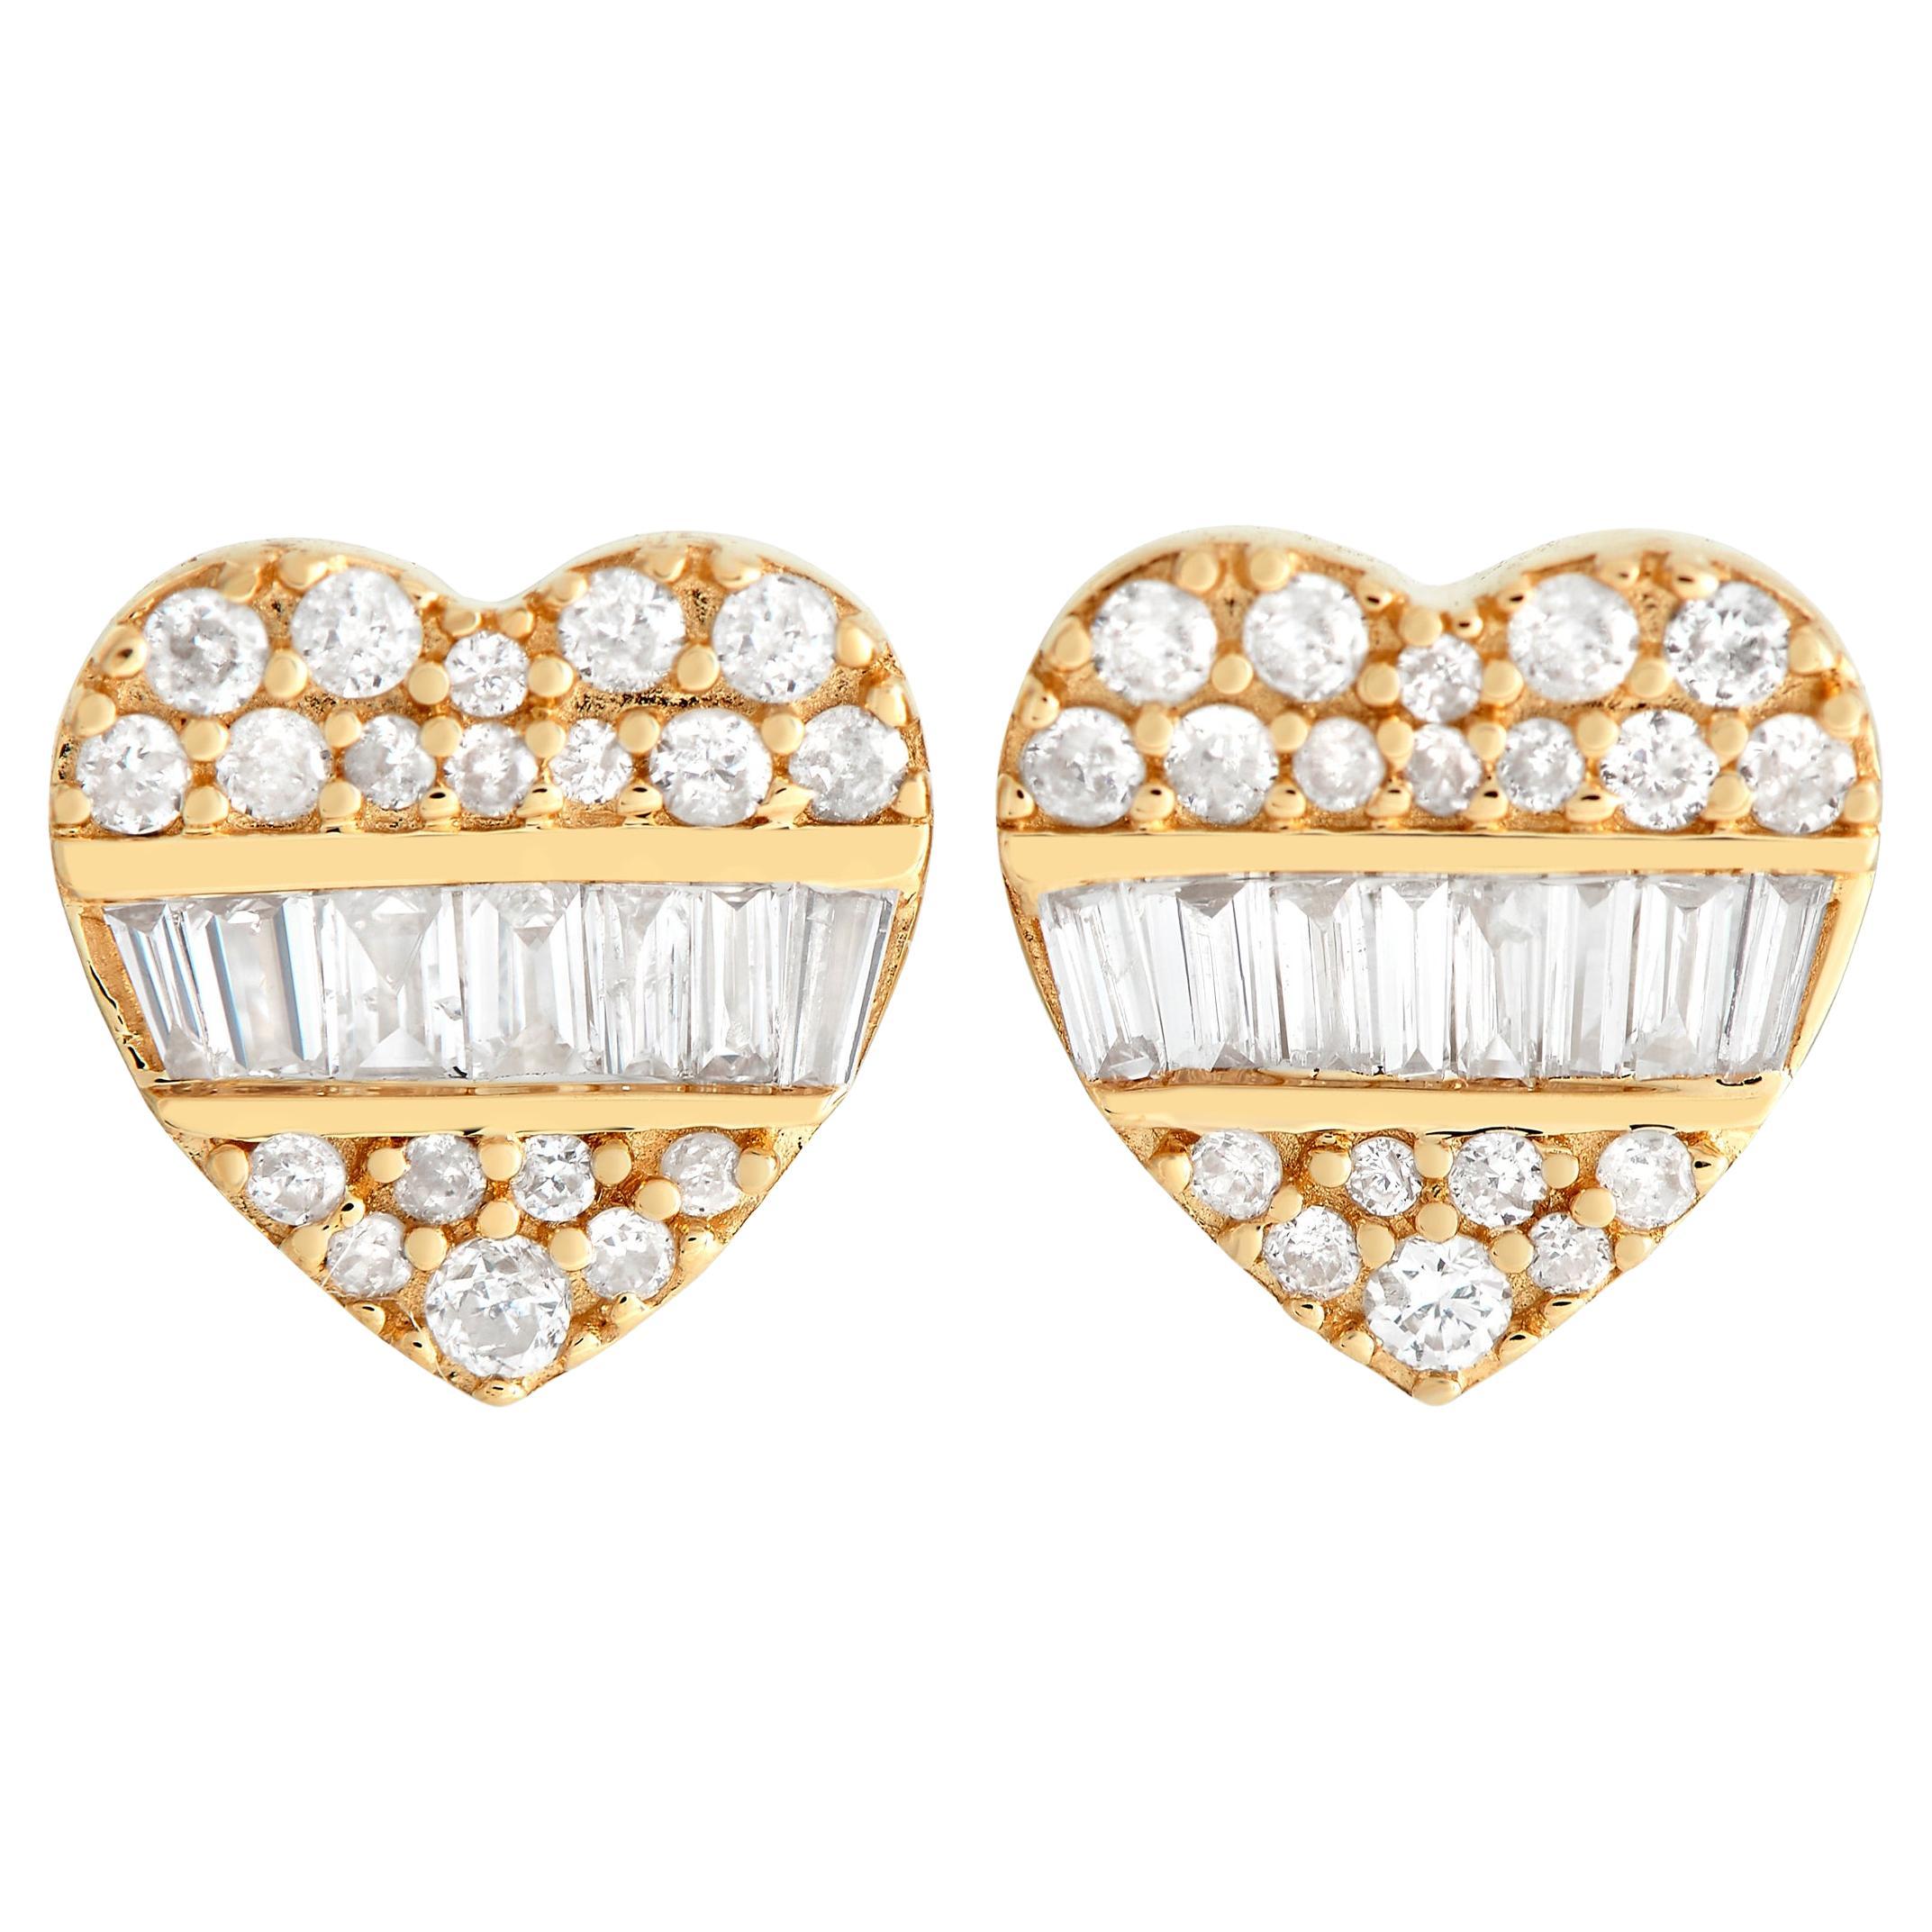 LB Exclusive 14K Yellow Gold 0.35ct Diamond Heart Earrings ER27896 For Sale